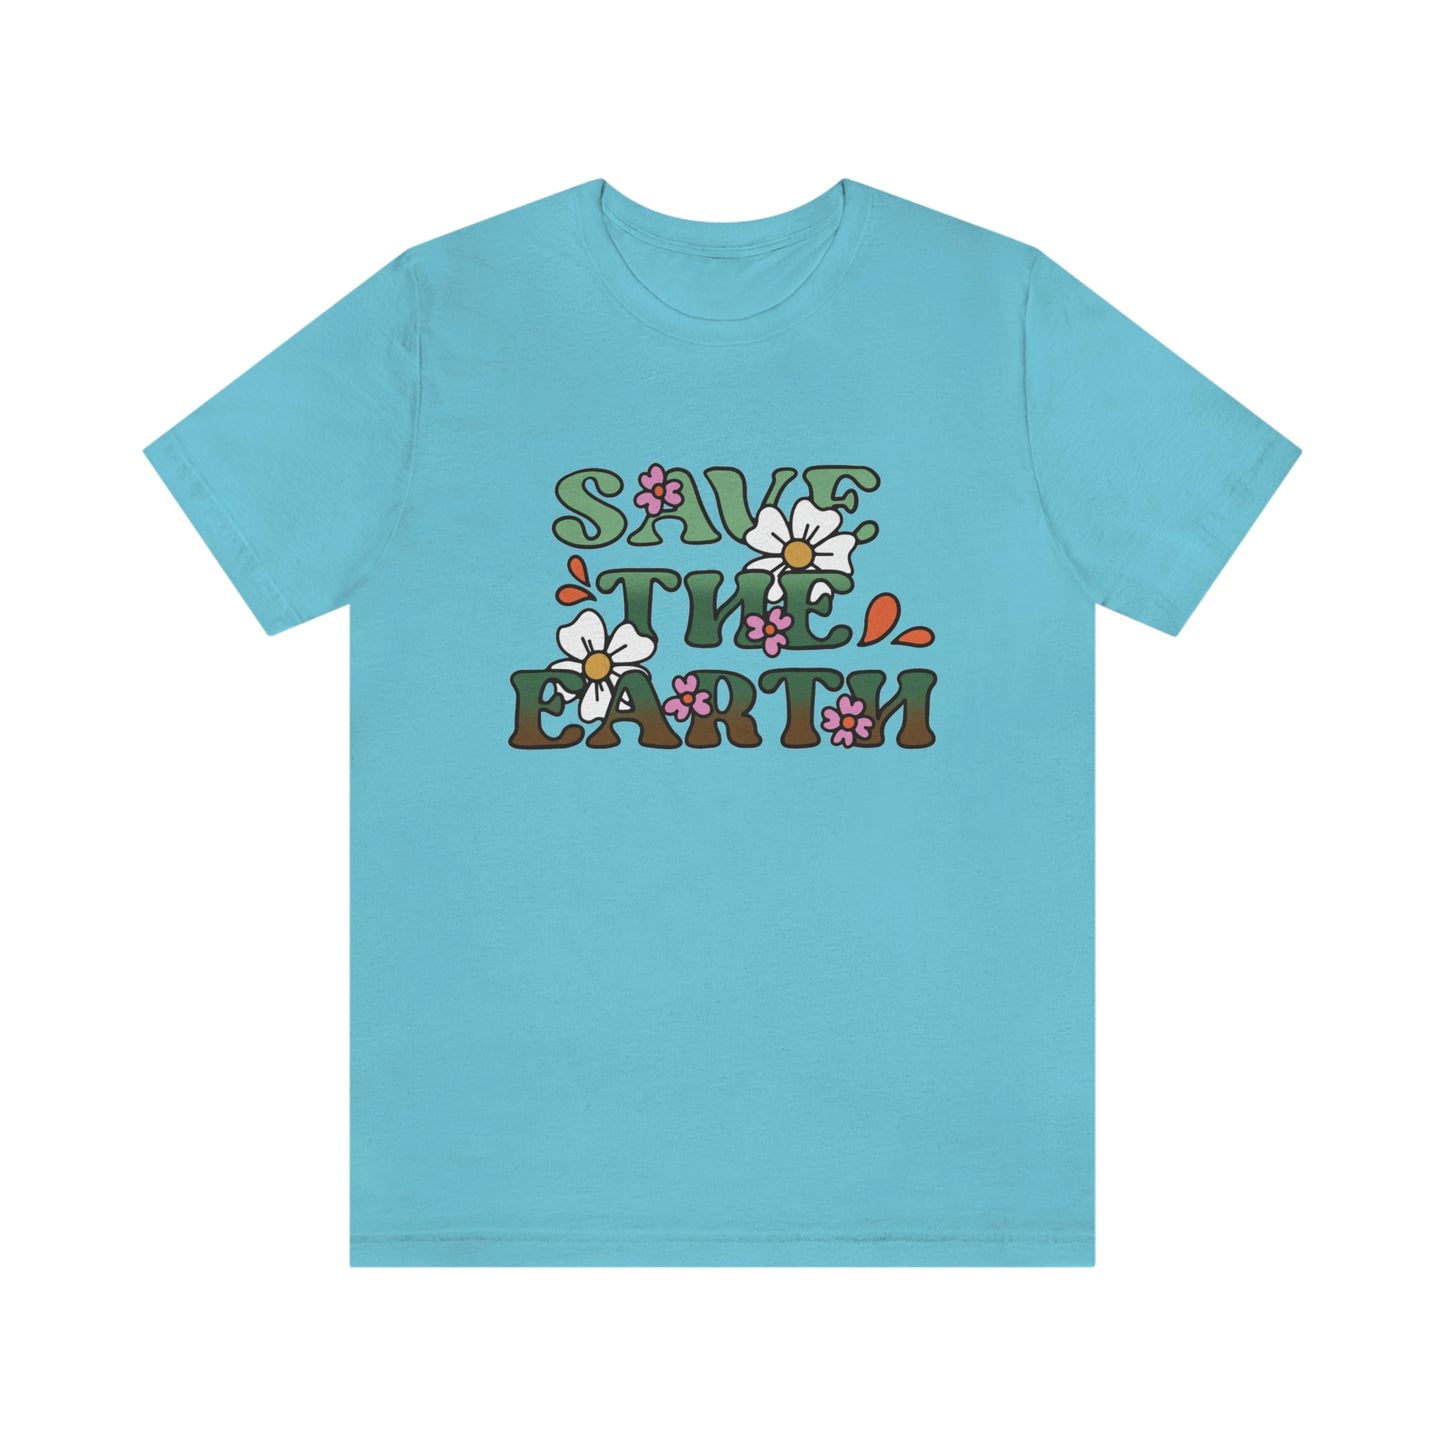 Save the Earth Unisex Jersey Short Sleeve Tee